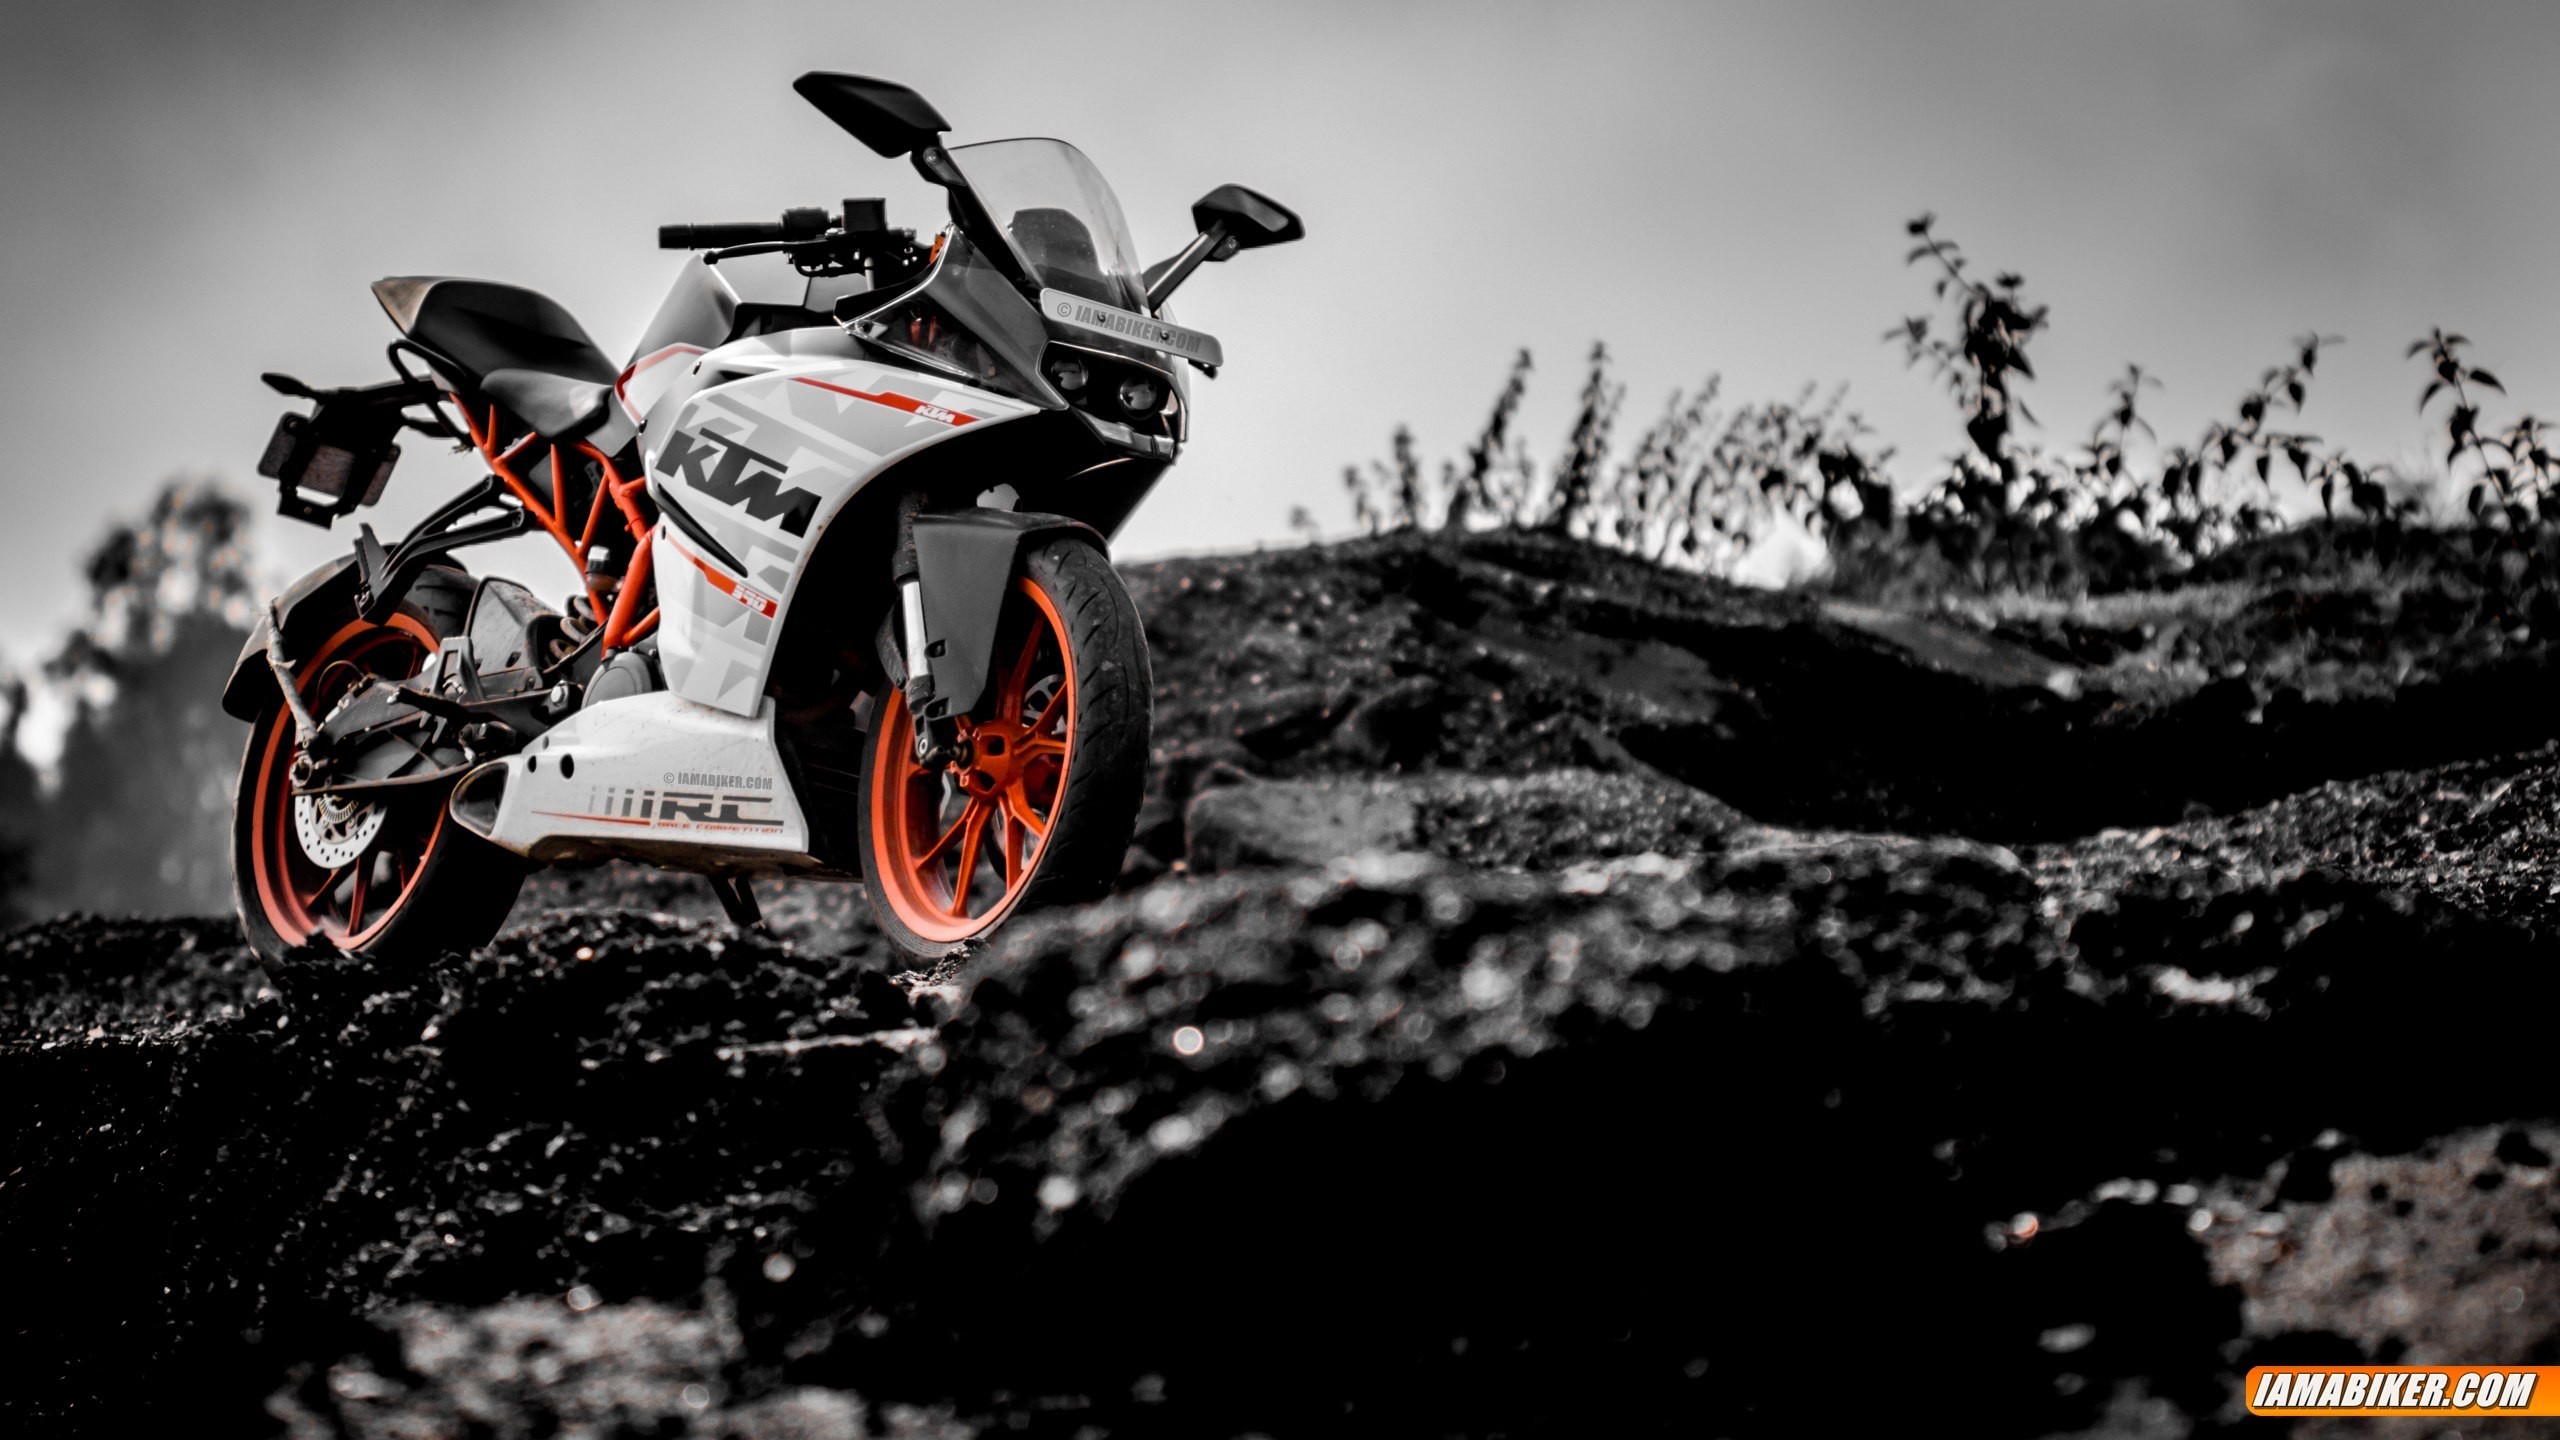 2560x1440 KTM RC 390 wallpapers - 6